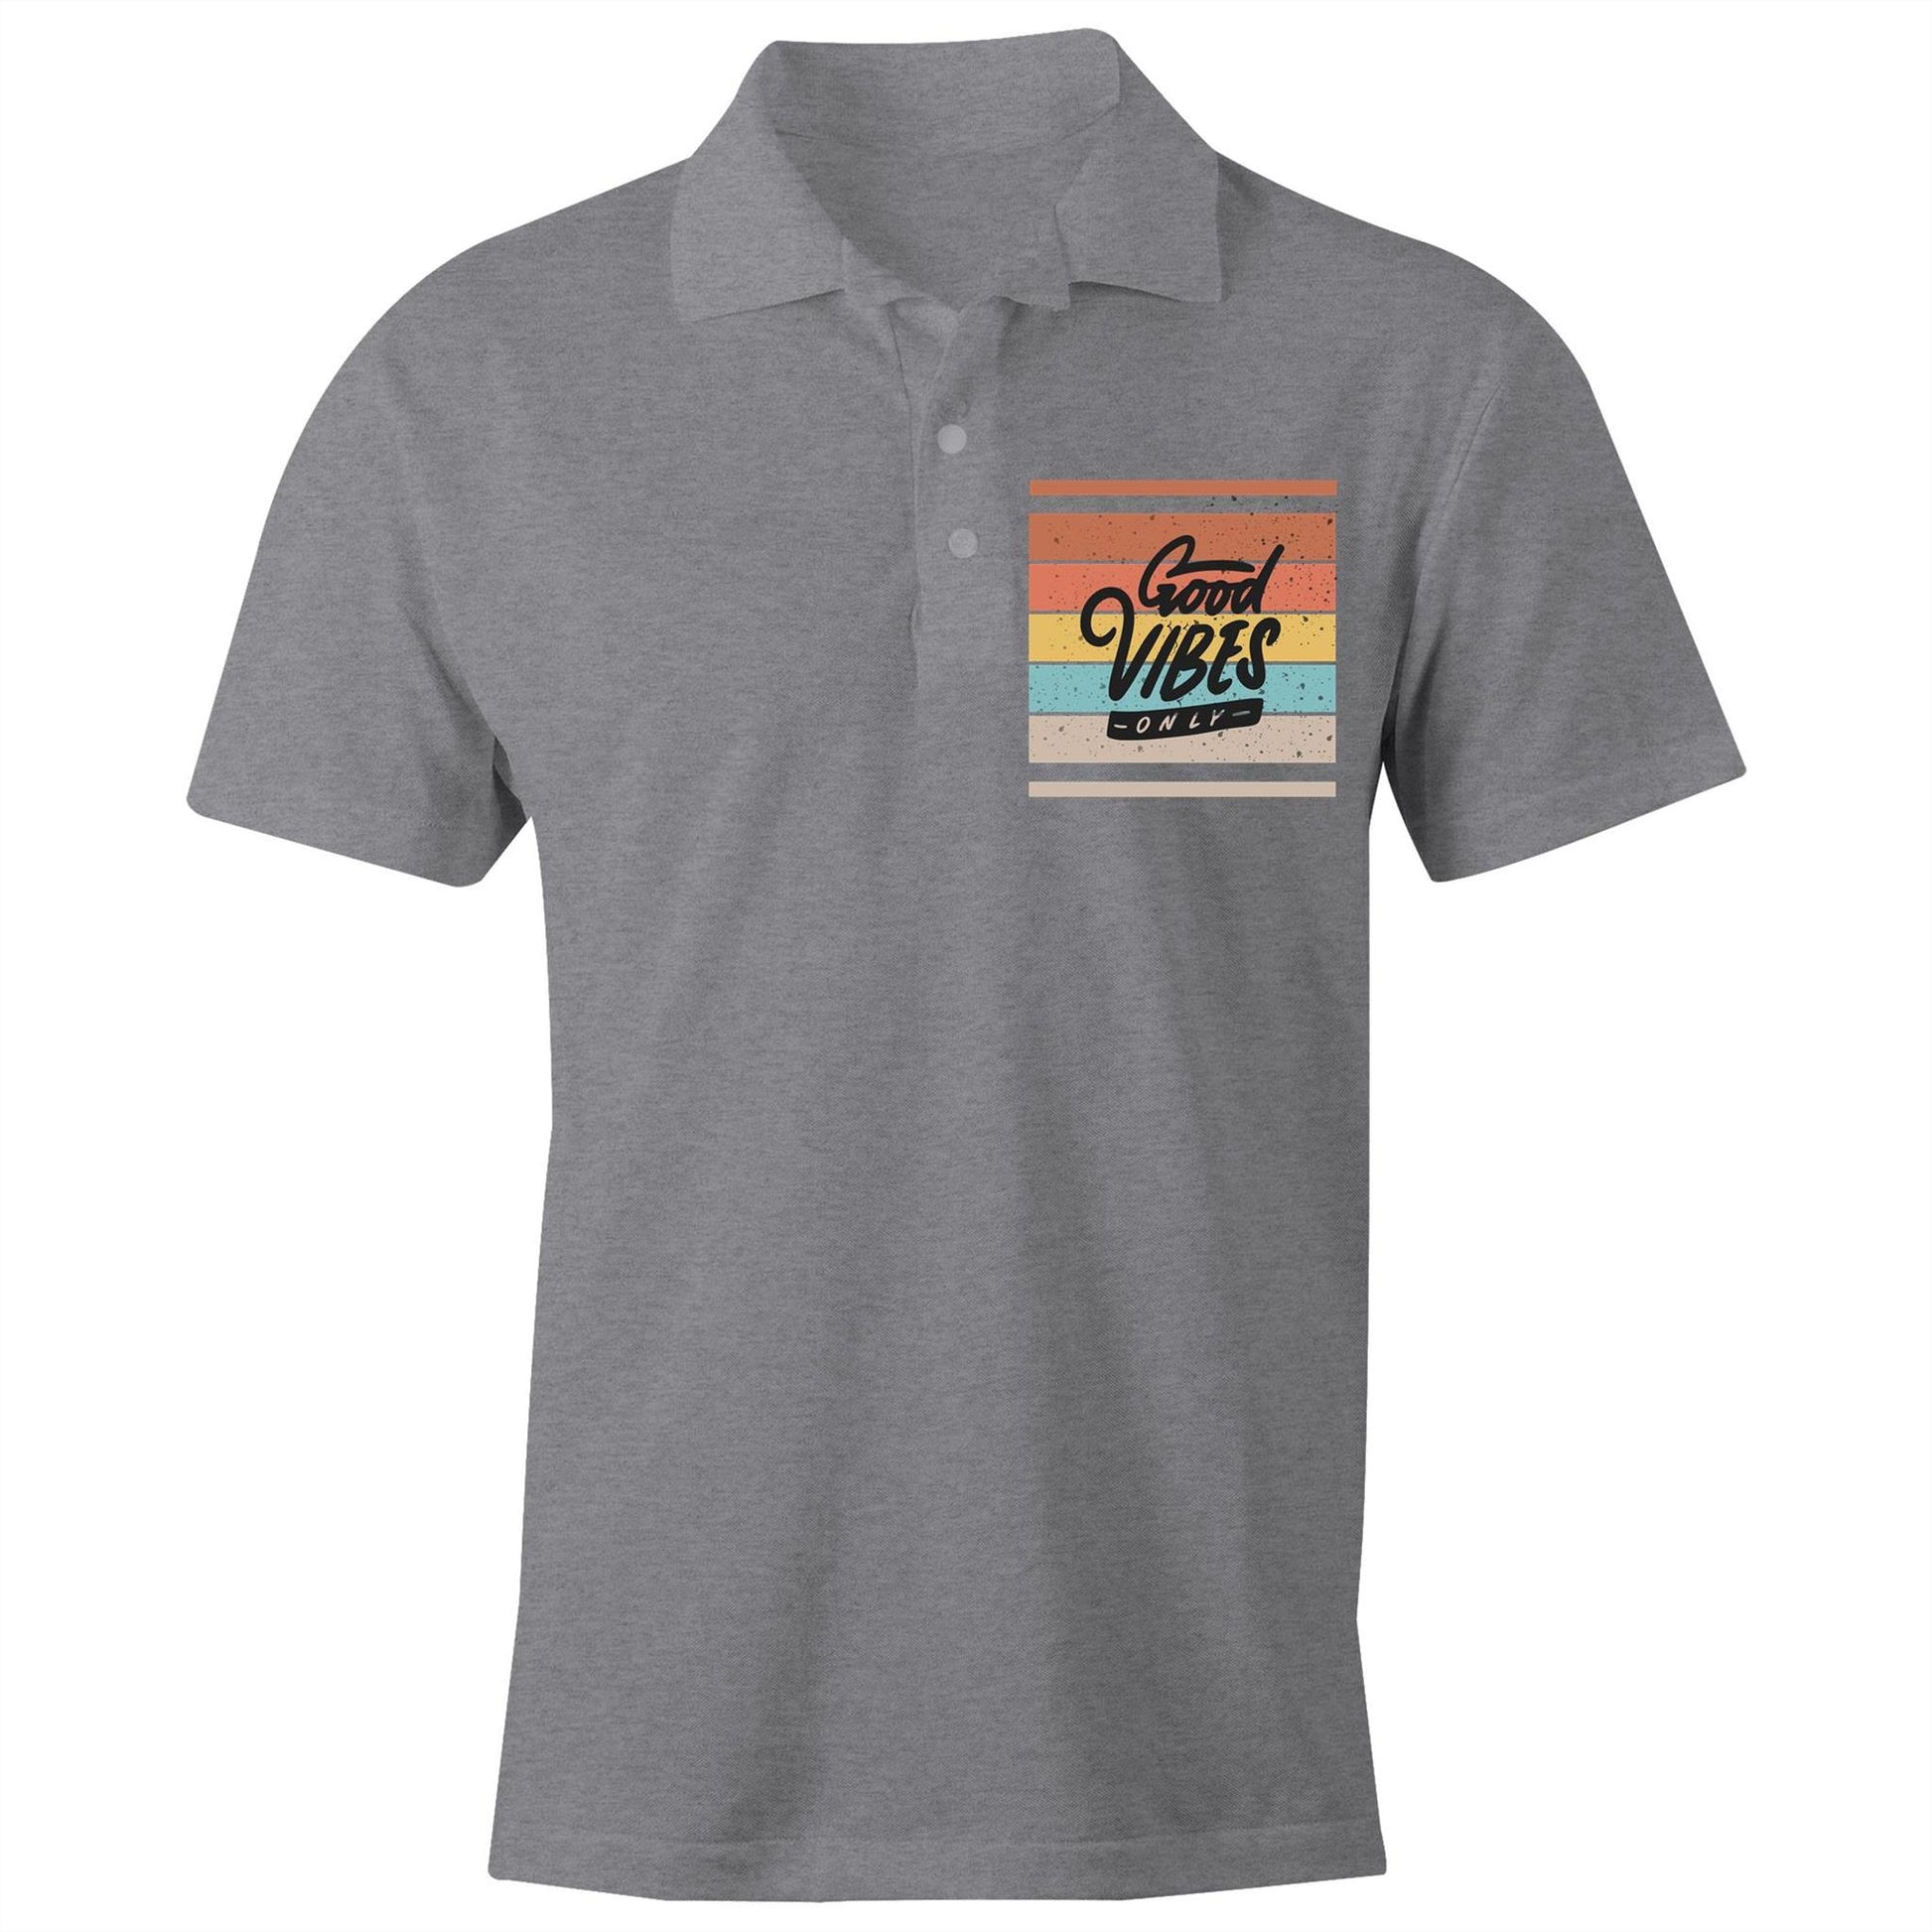 Good Vibes Only - Chad S/S Polo Shirt, Printed Grey Marle Polo Shirt Motivation Retro